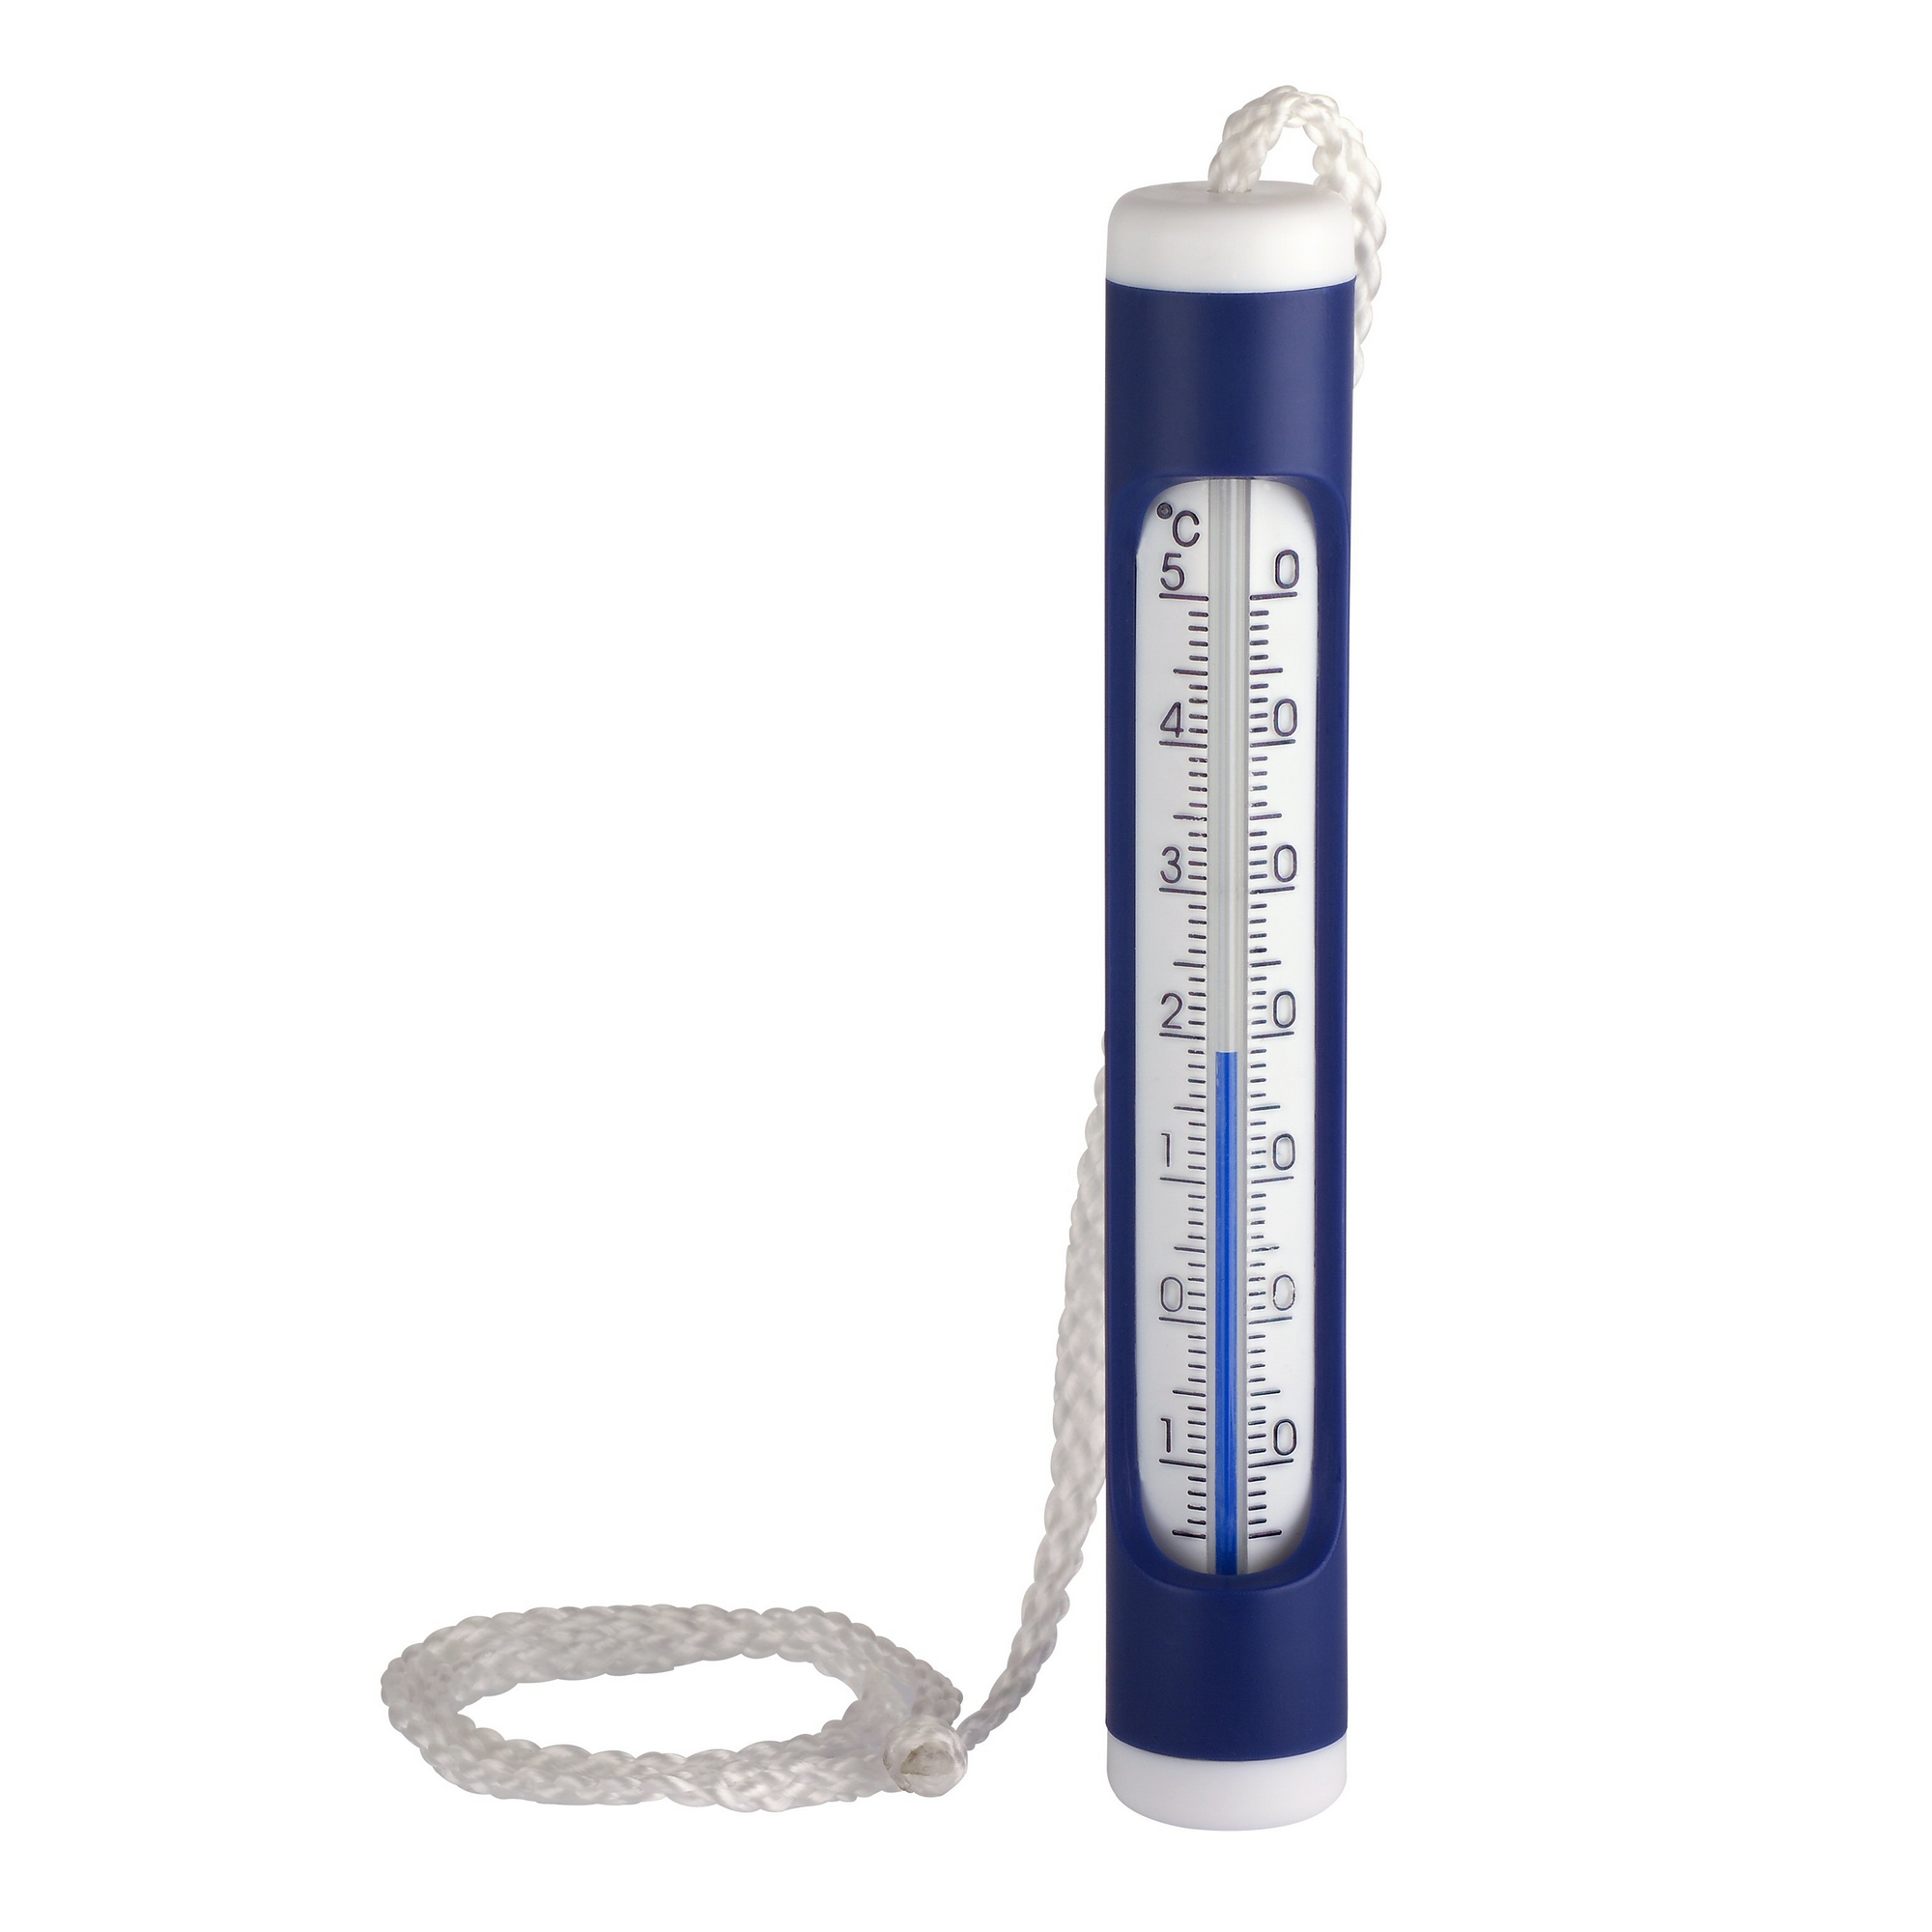 Teich- und Poolthermometer Kunststoff 16 cm + product picture